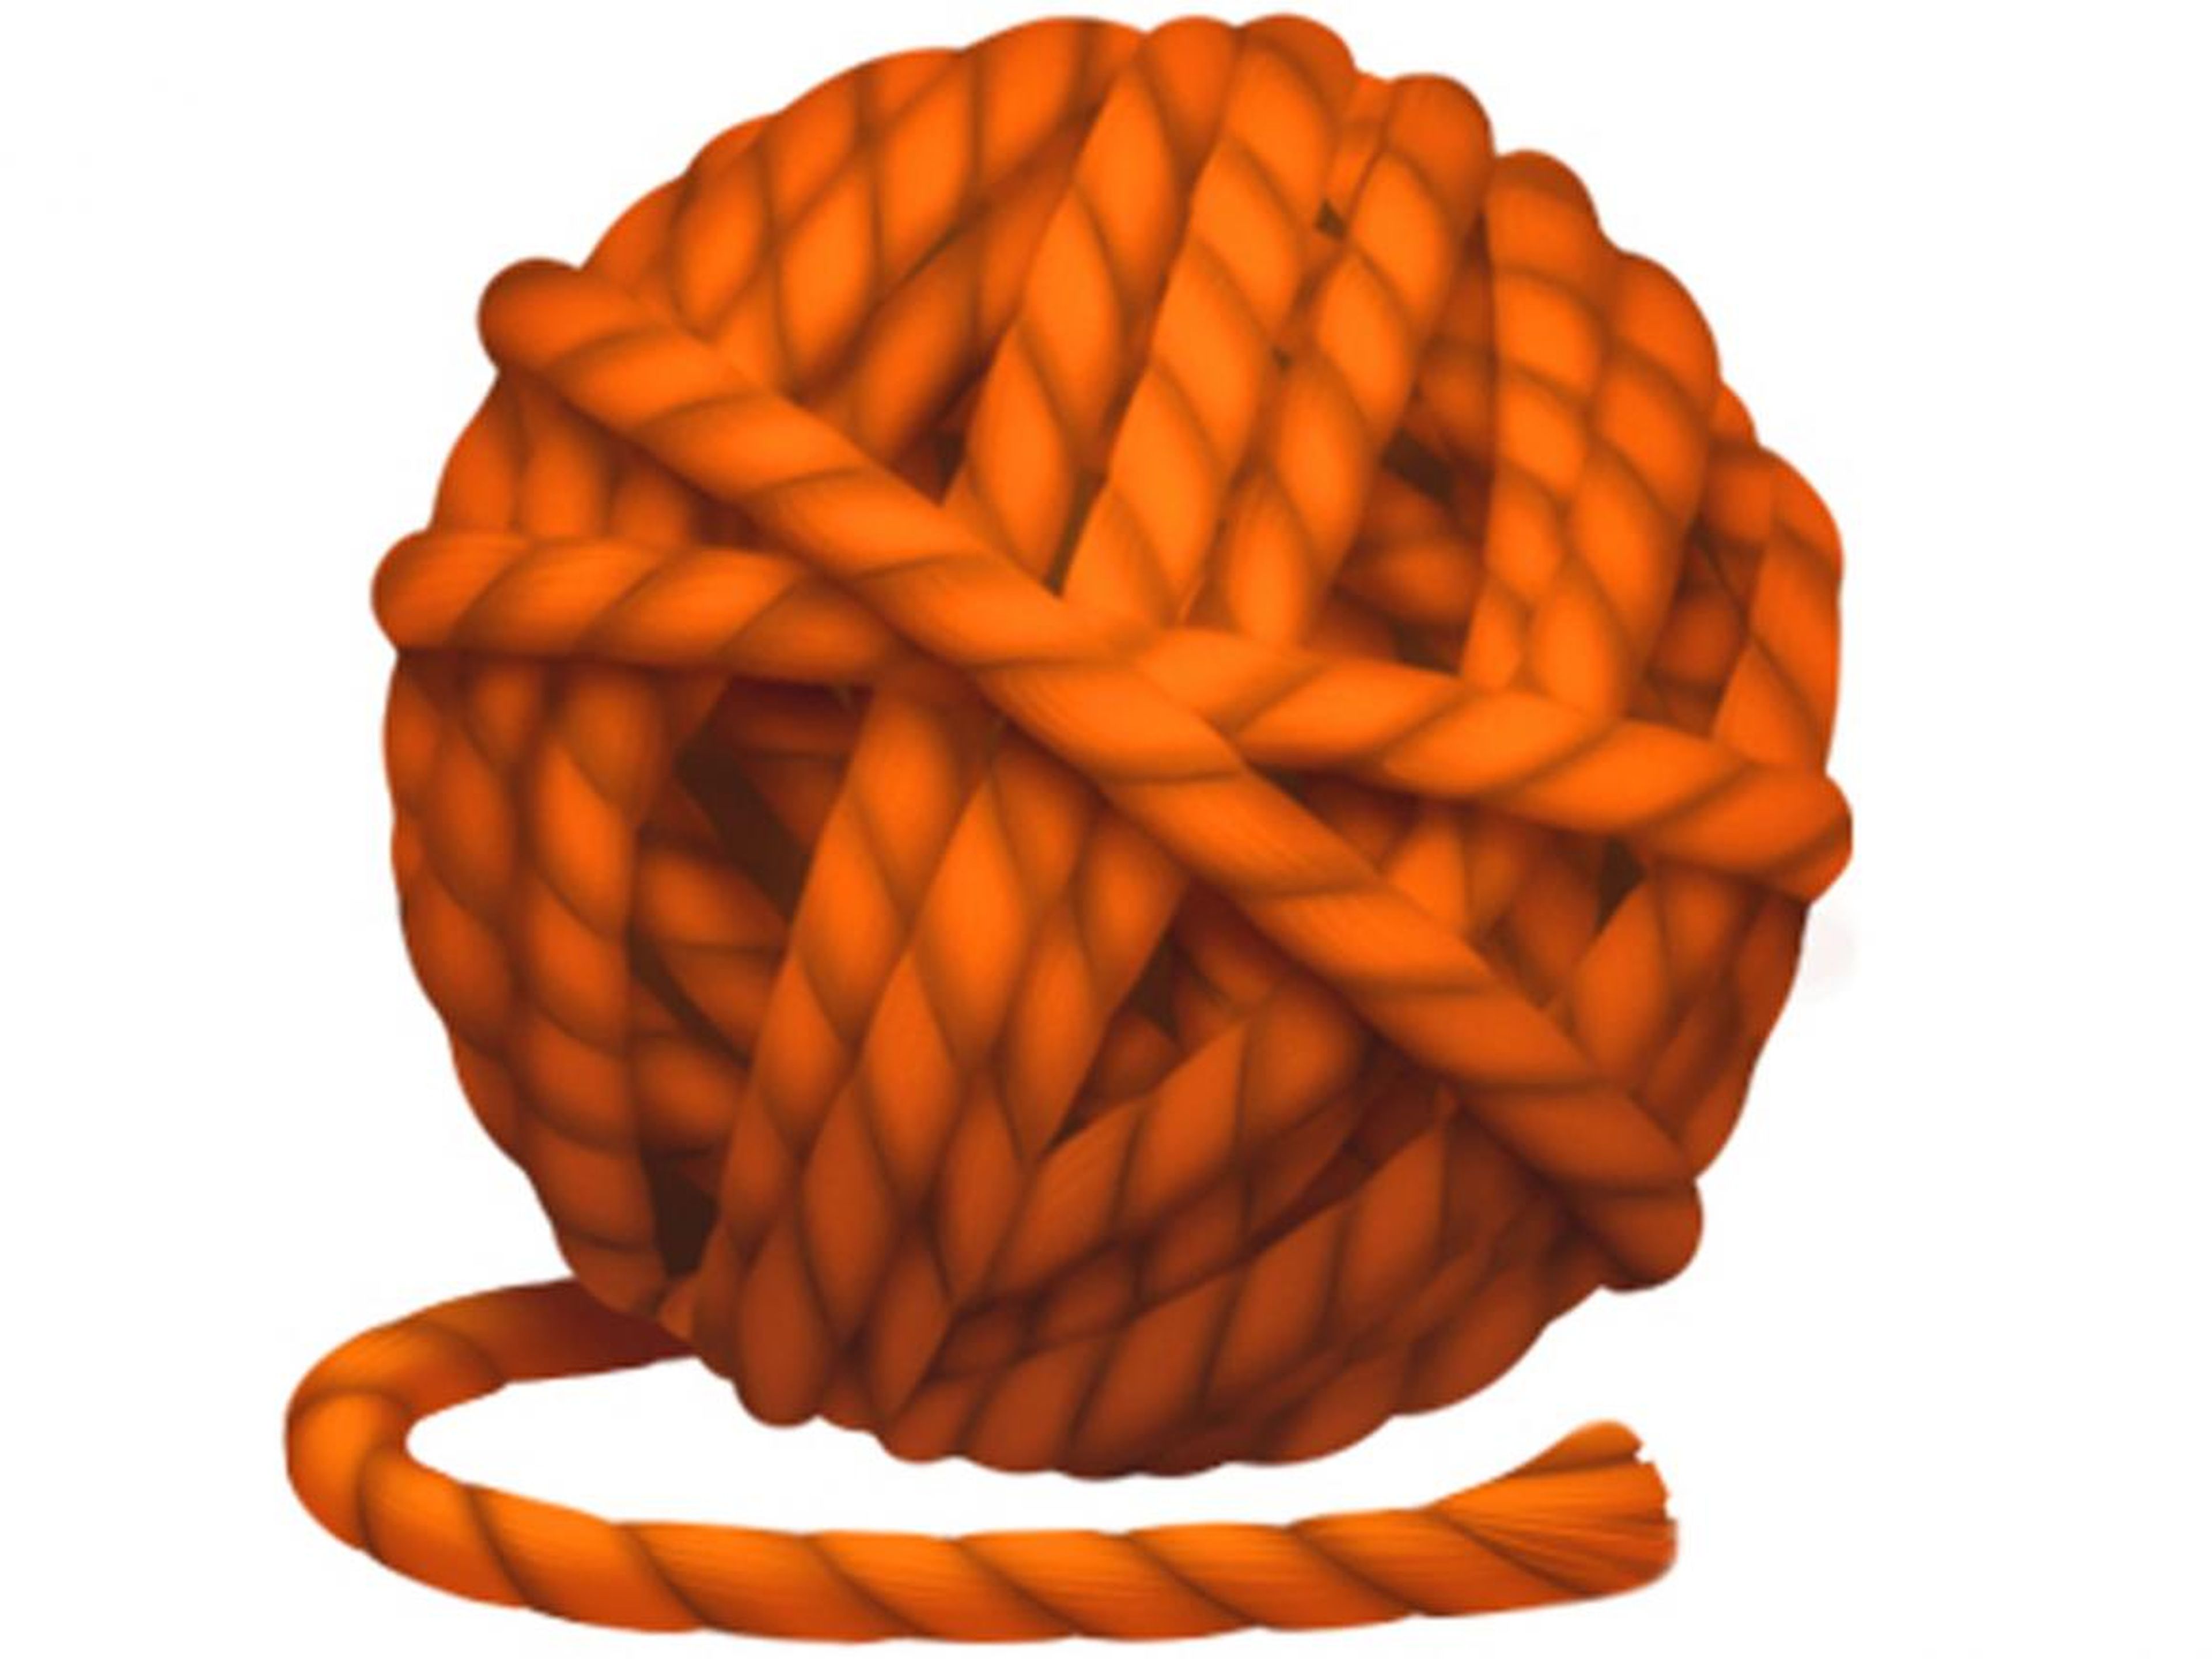 For all the knitters out there, there's going to be a ball of yarn emoji.